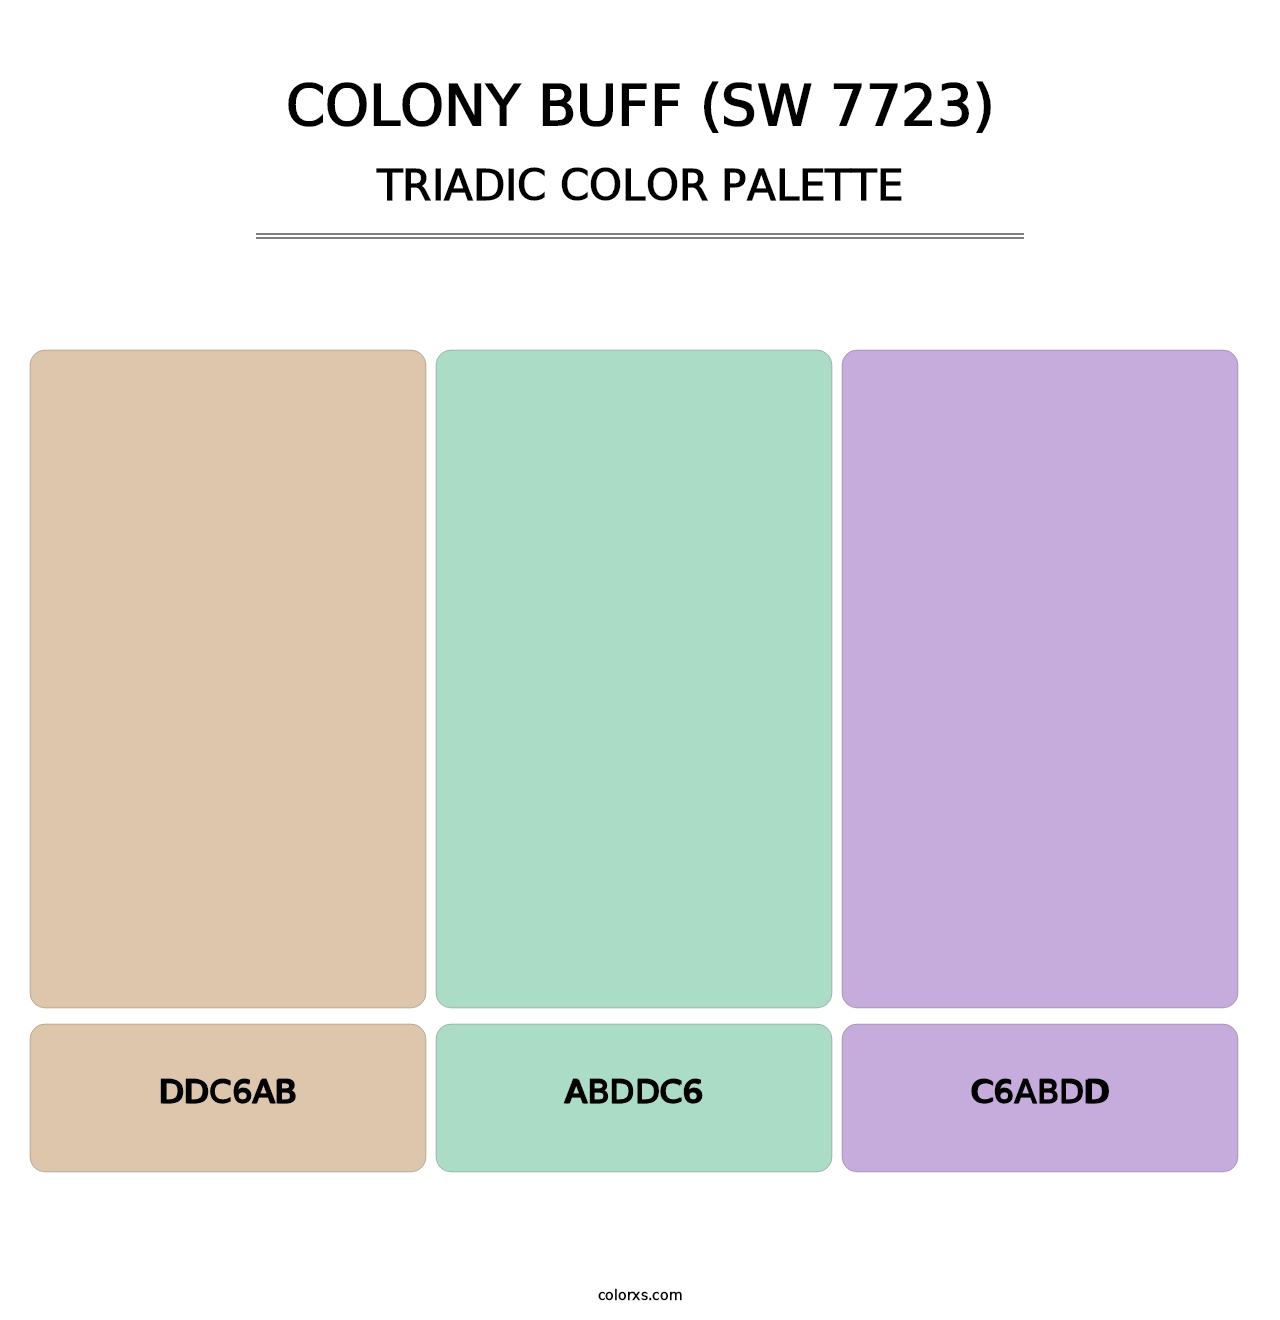 Colony Buff (SW 7723) - Triadic Color Palette